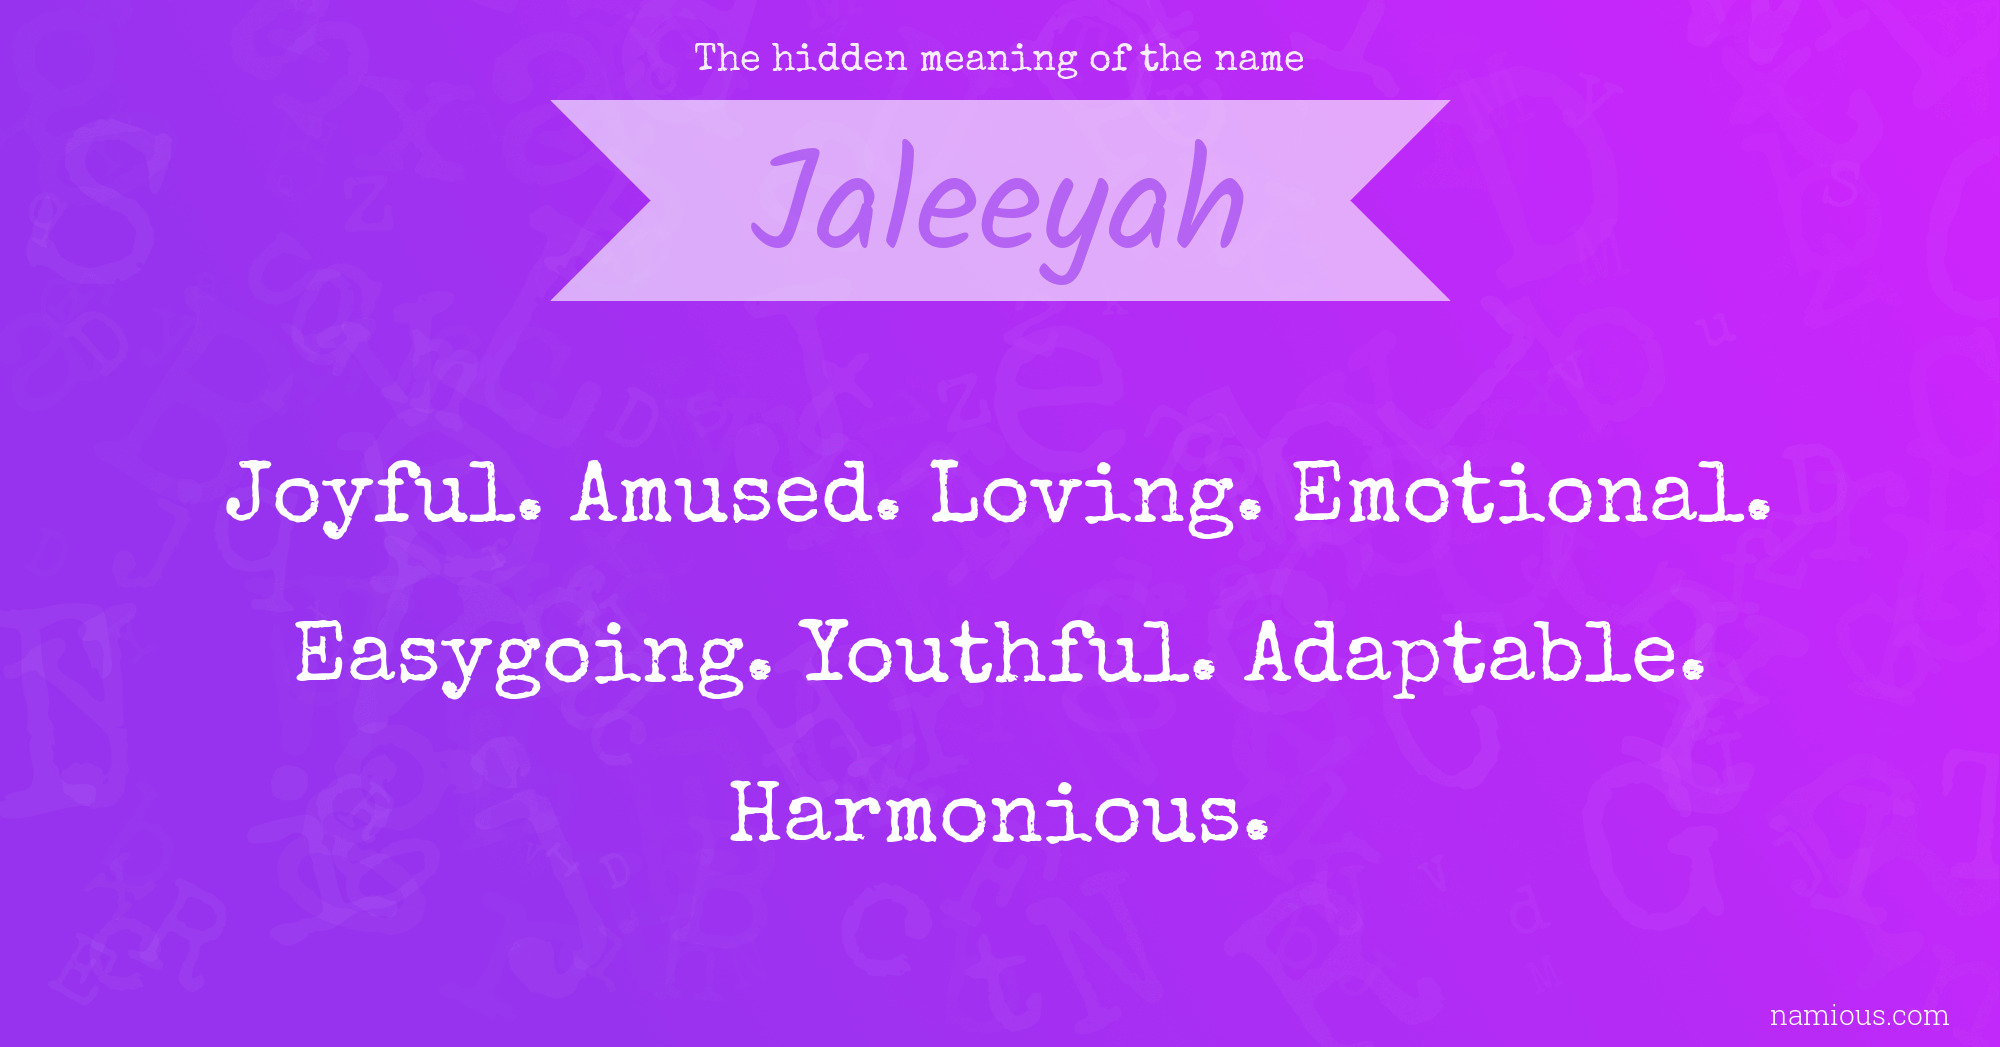 The hidden meaning of the name Jaleeyah